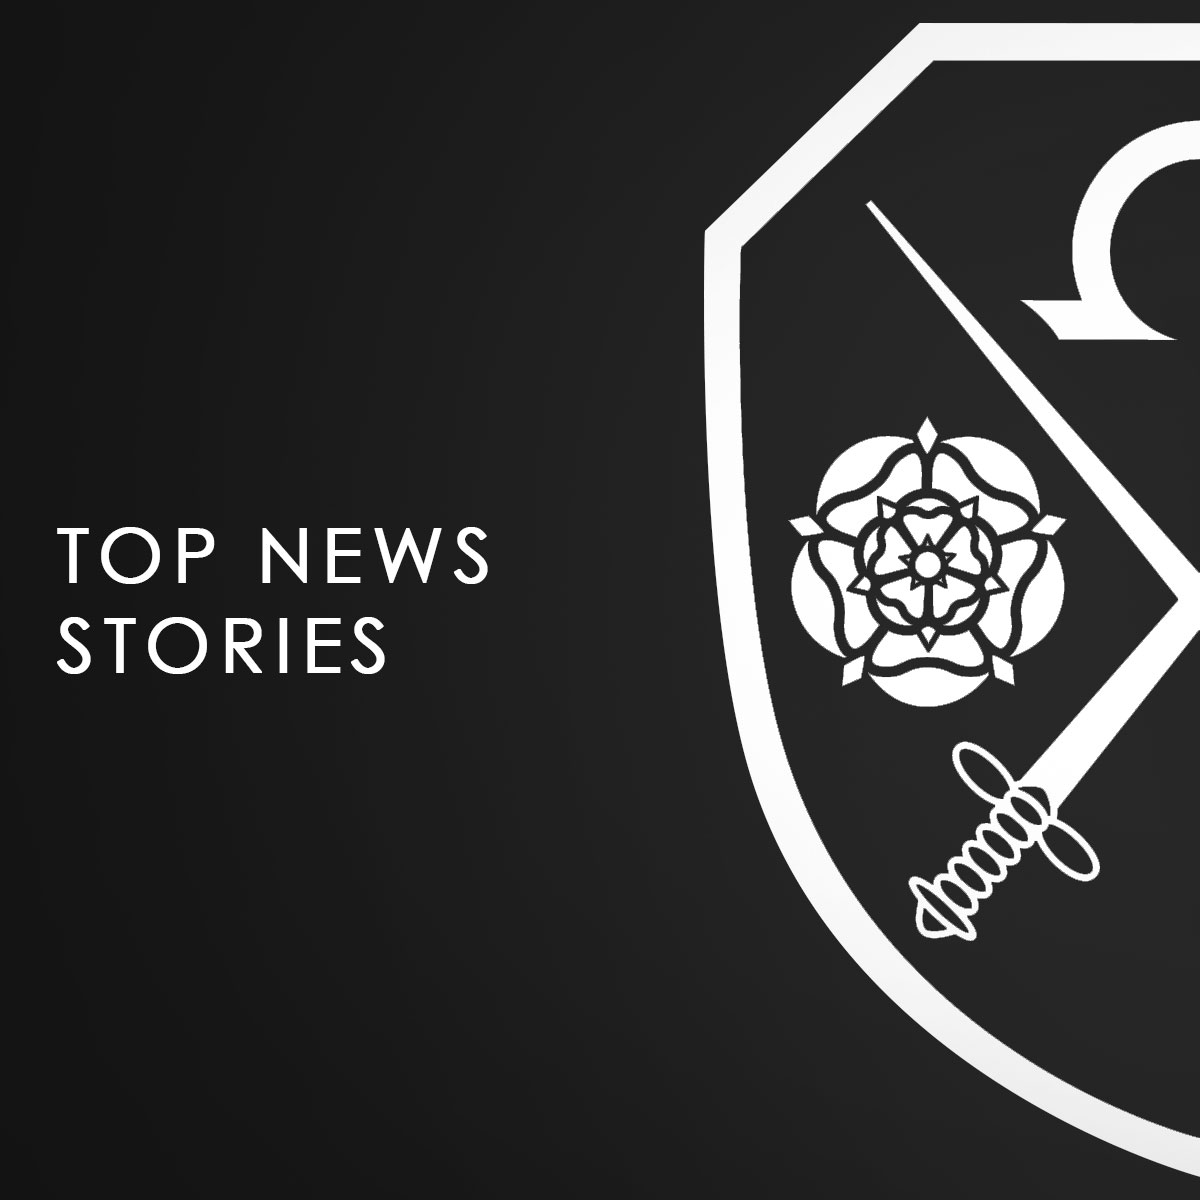 A black background with the East Barnet School logo which says Top News Stories